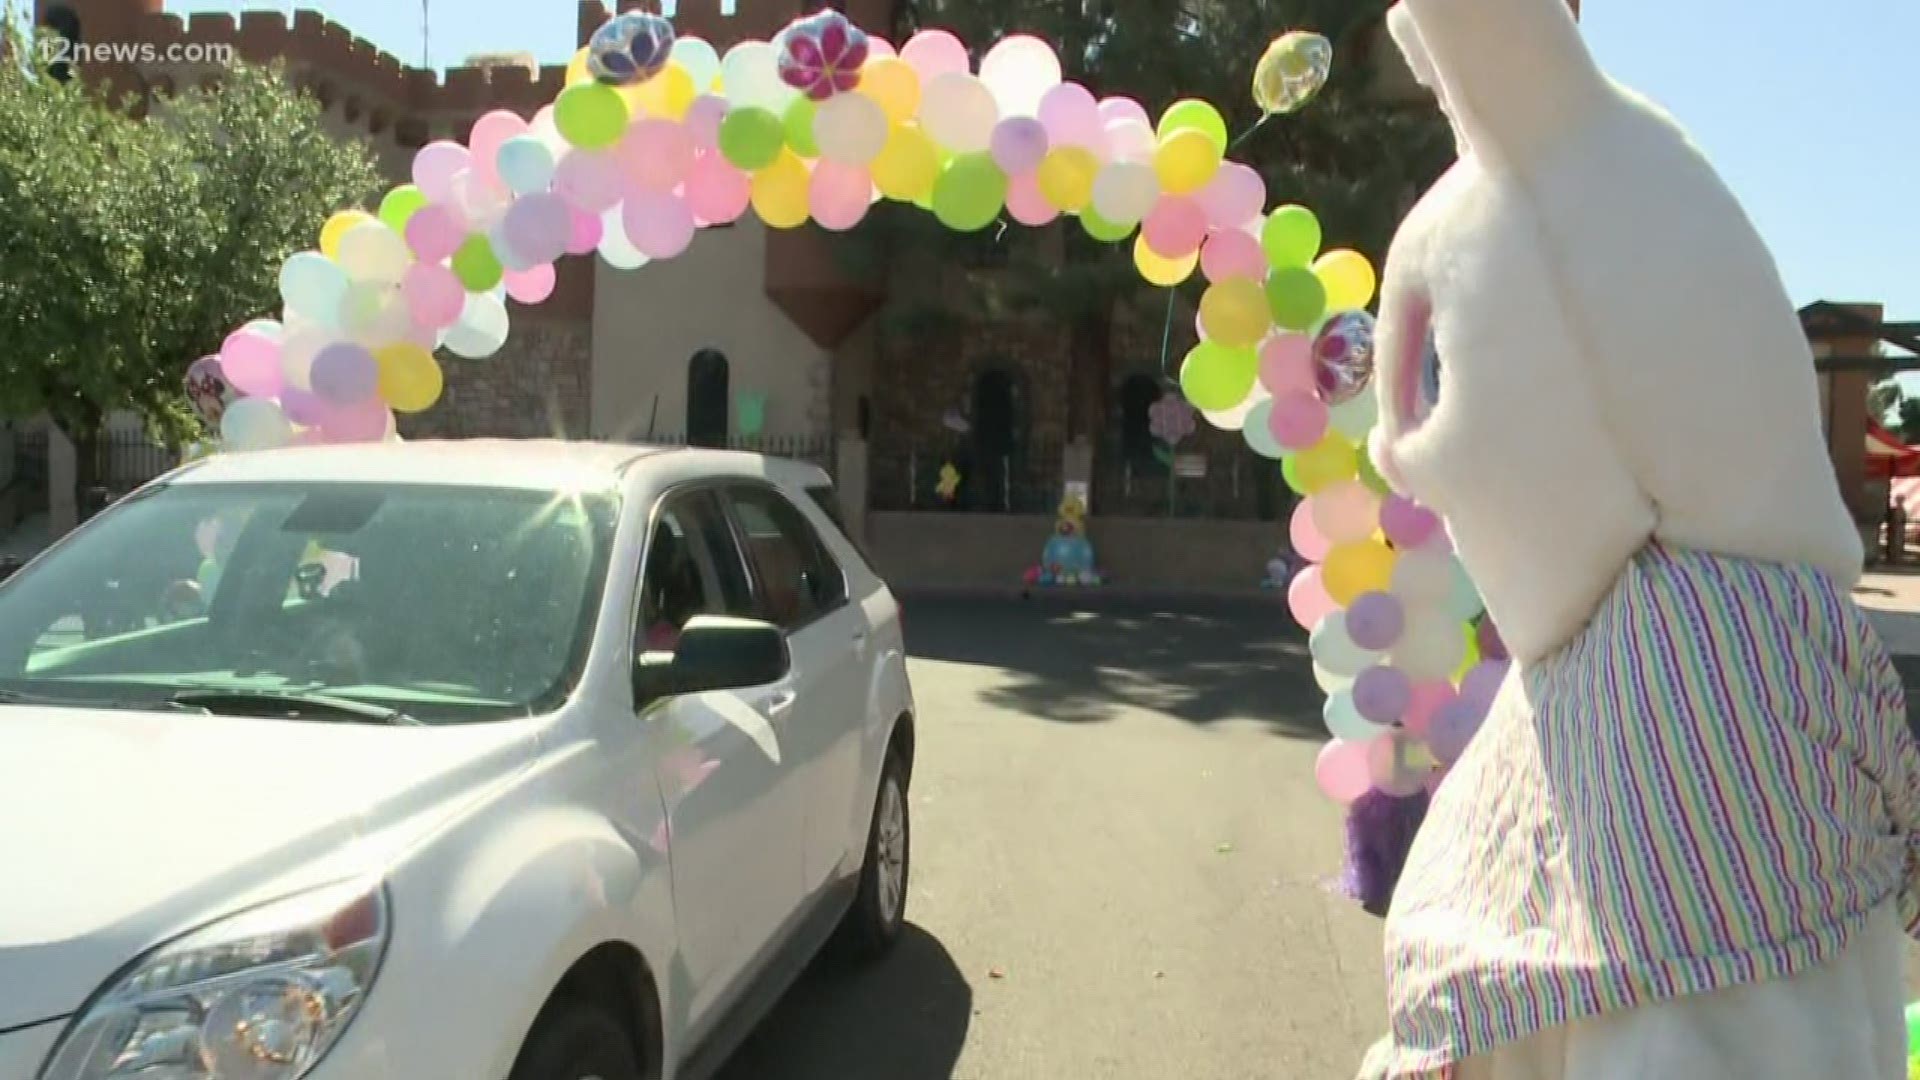 Communities across the Valley are finding ways to celebrate the Easter holiday in unique ways. In Mesa, a drive-thru lets you get in facetime with the Easter Bunny.